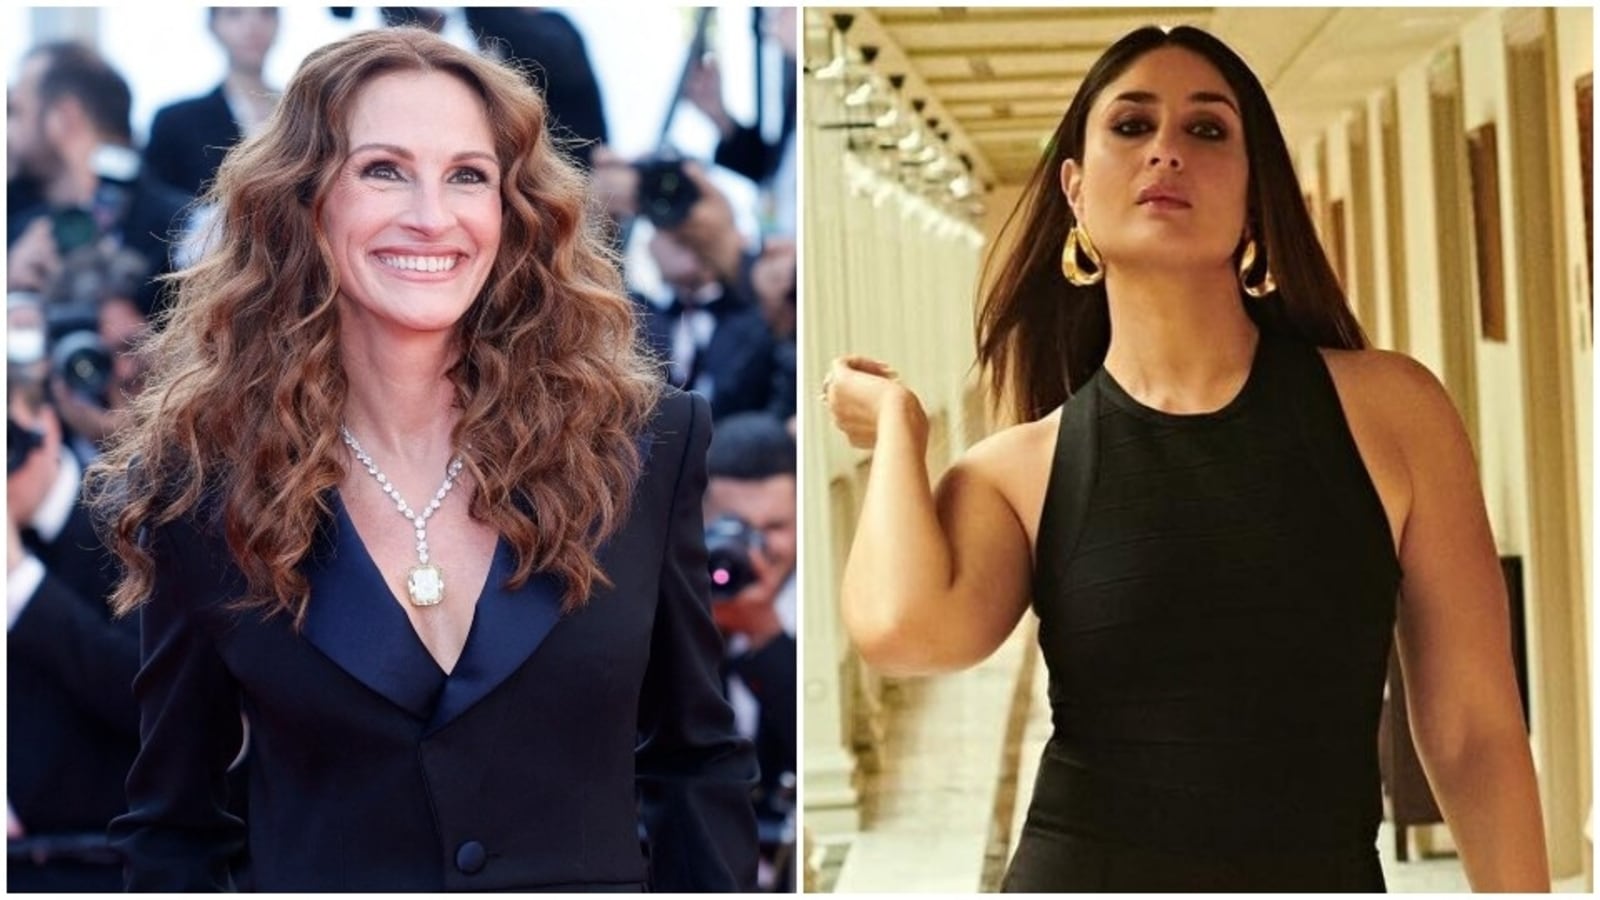 Cannes Film Festival 2022: Julia Roberts in Louis Vuitton at the